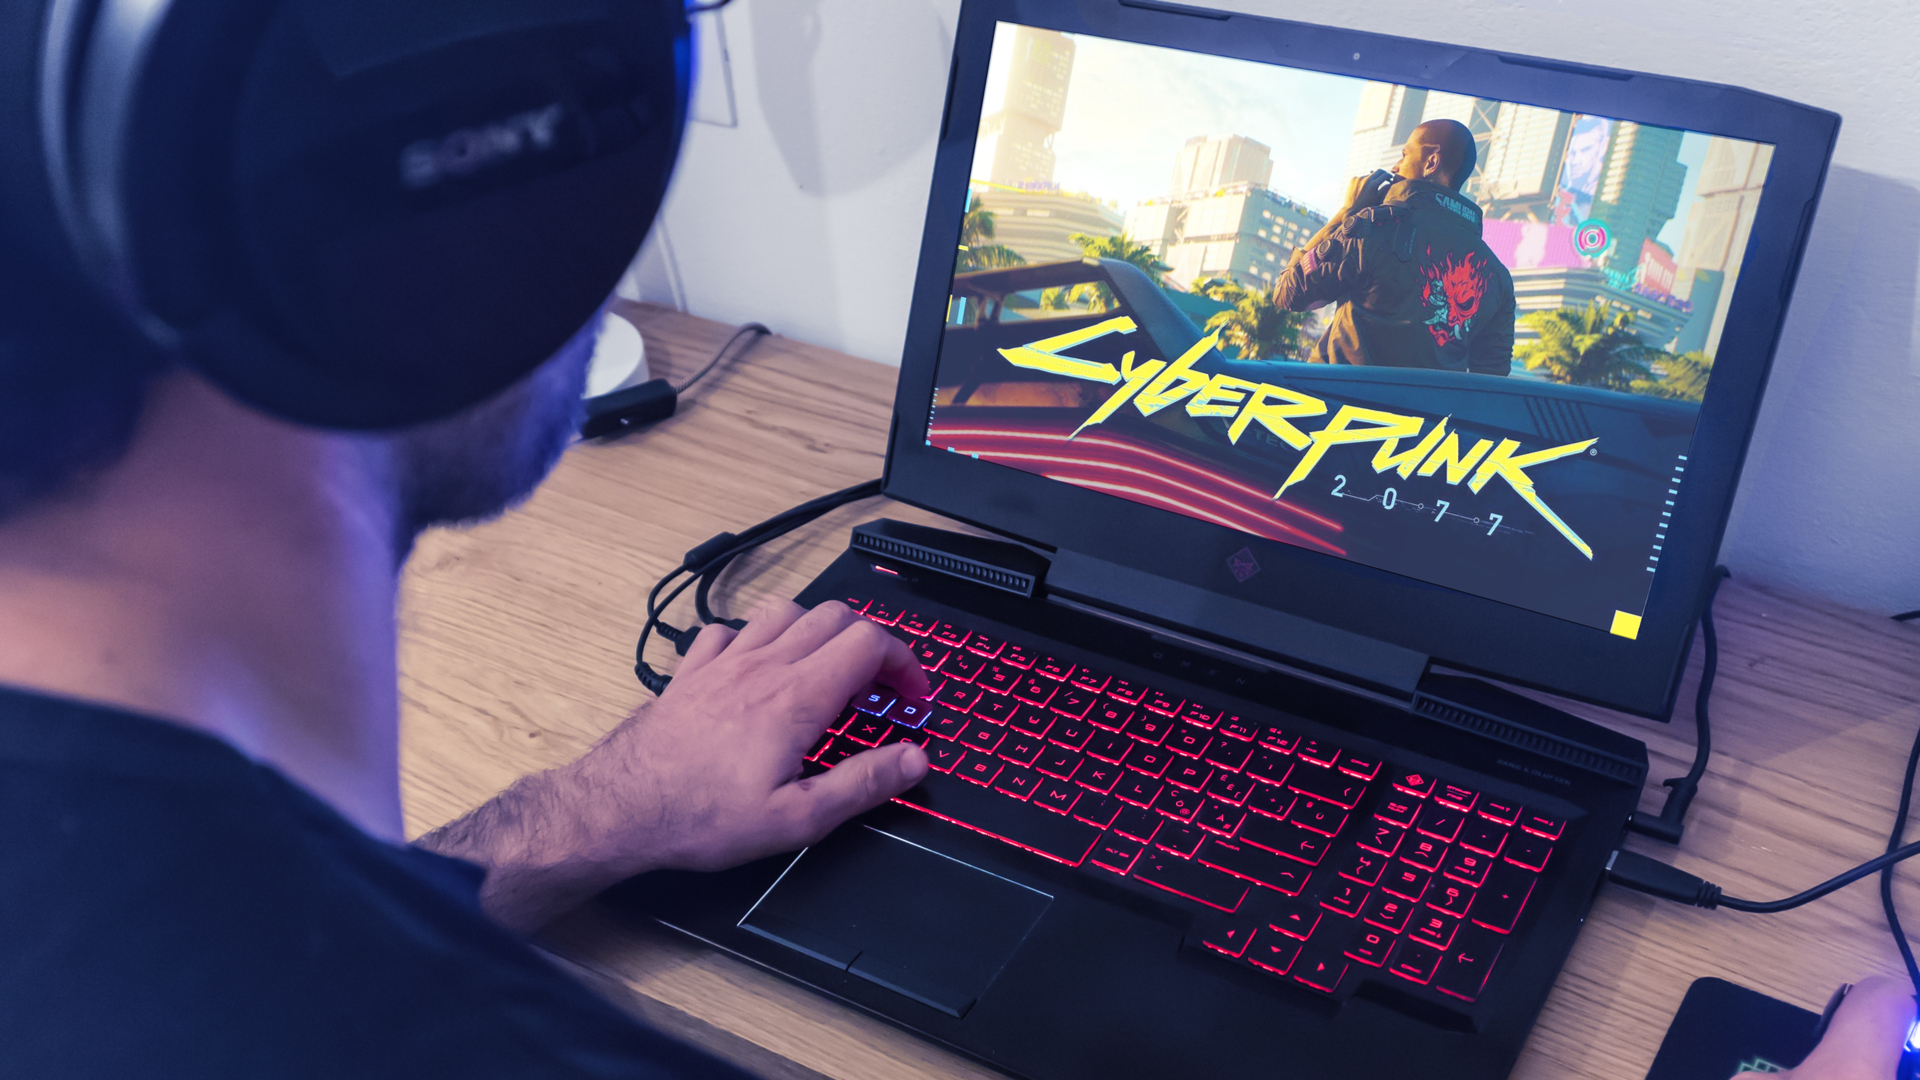 Intel is making some of the thinnest gaming laptops ever at CES 2021